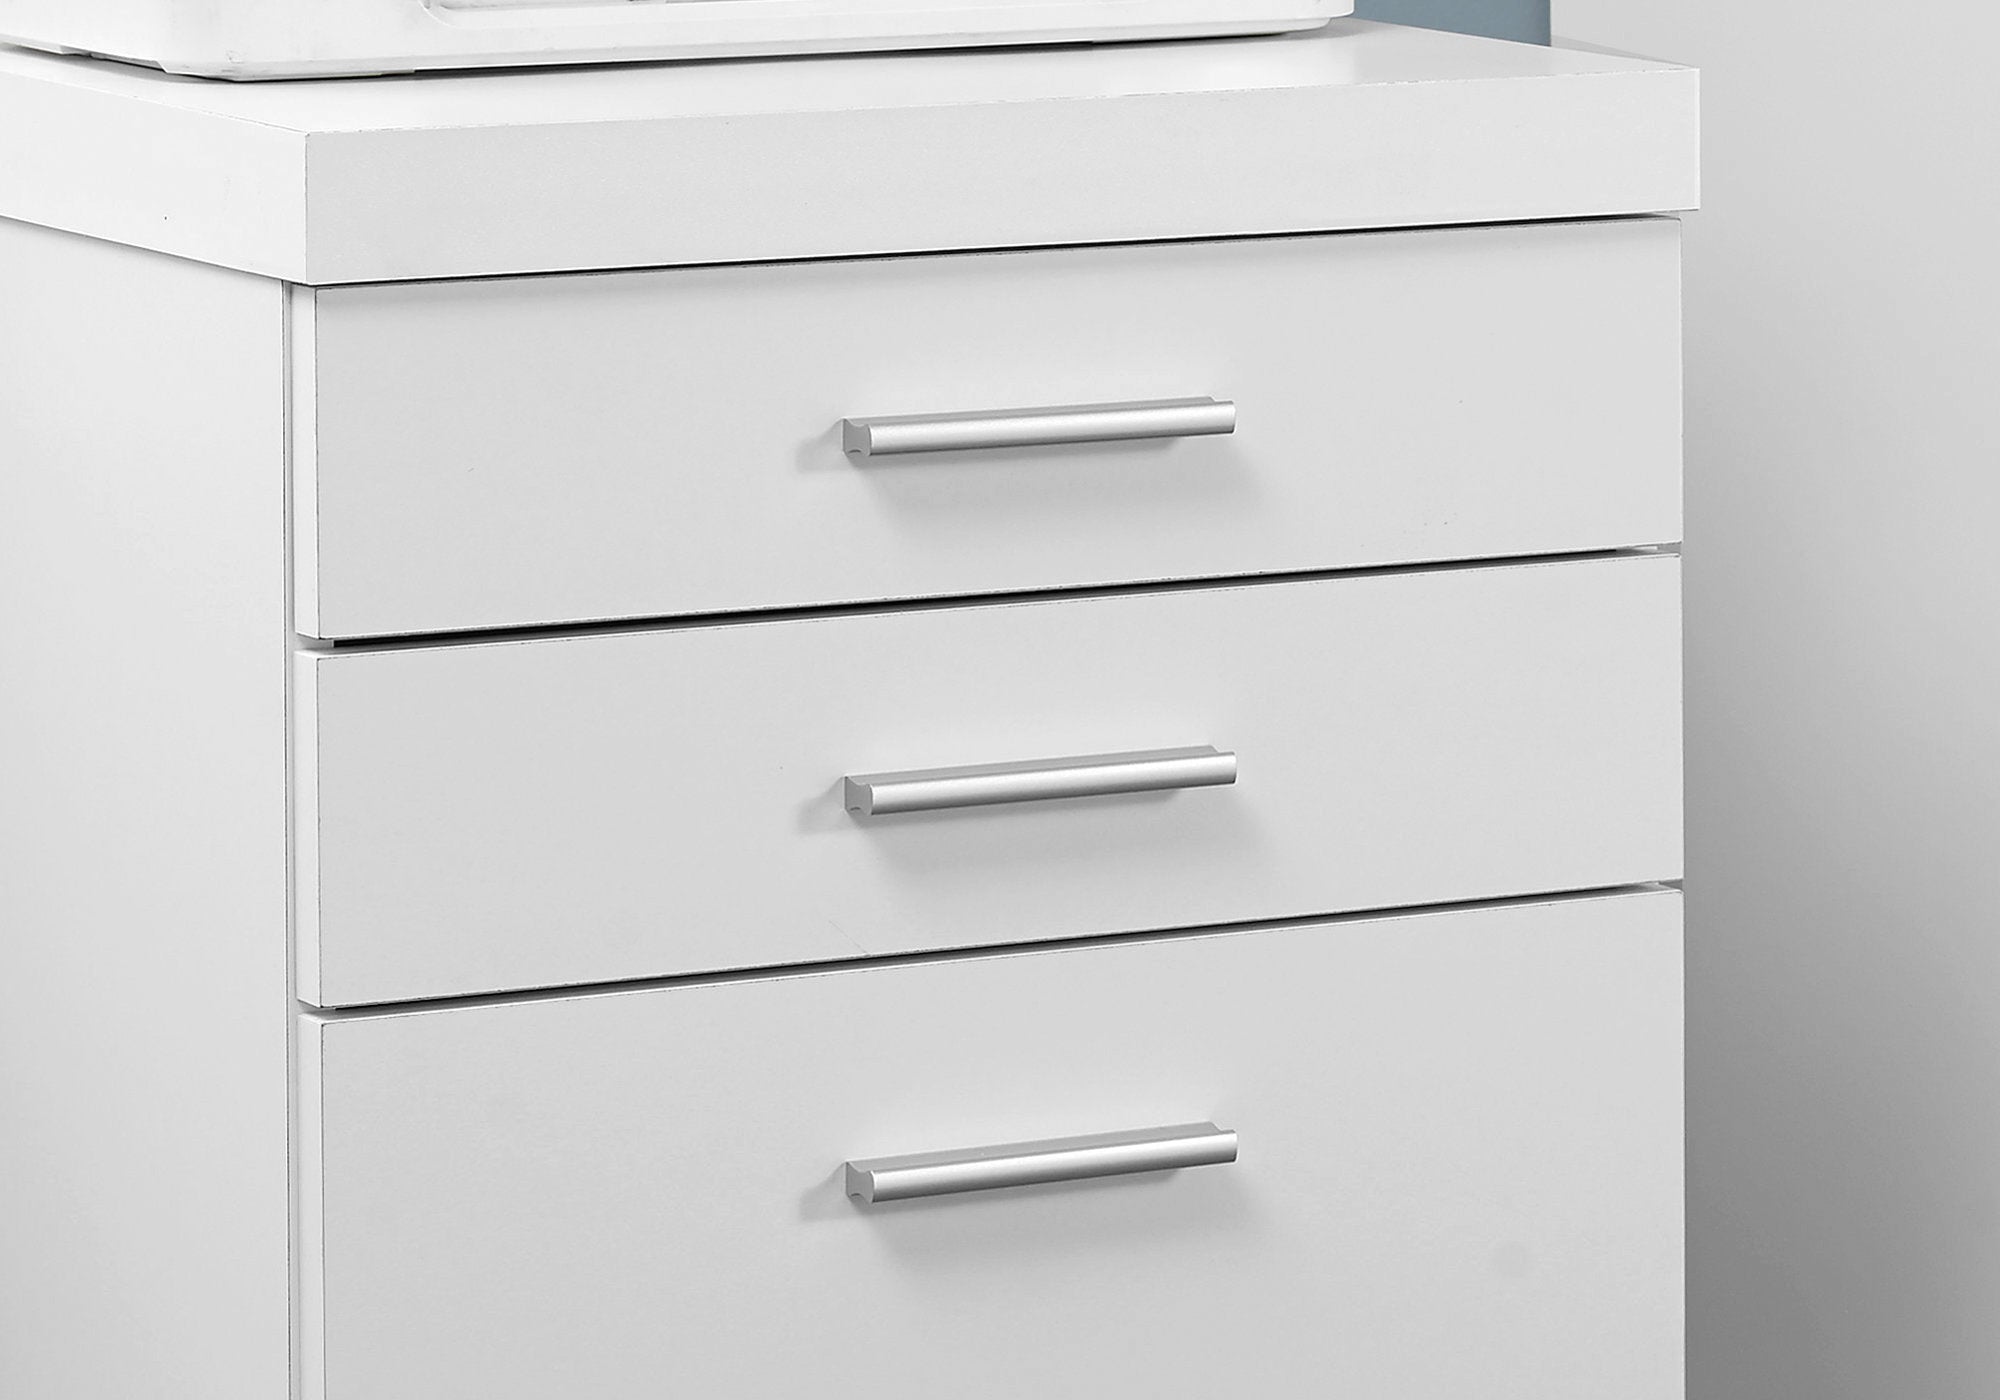 17.75" x 18.25" x 25.25" White Black Particle Board 3 Drawers  Filing Cabinet